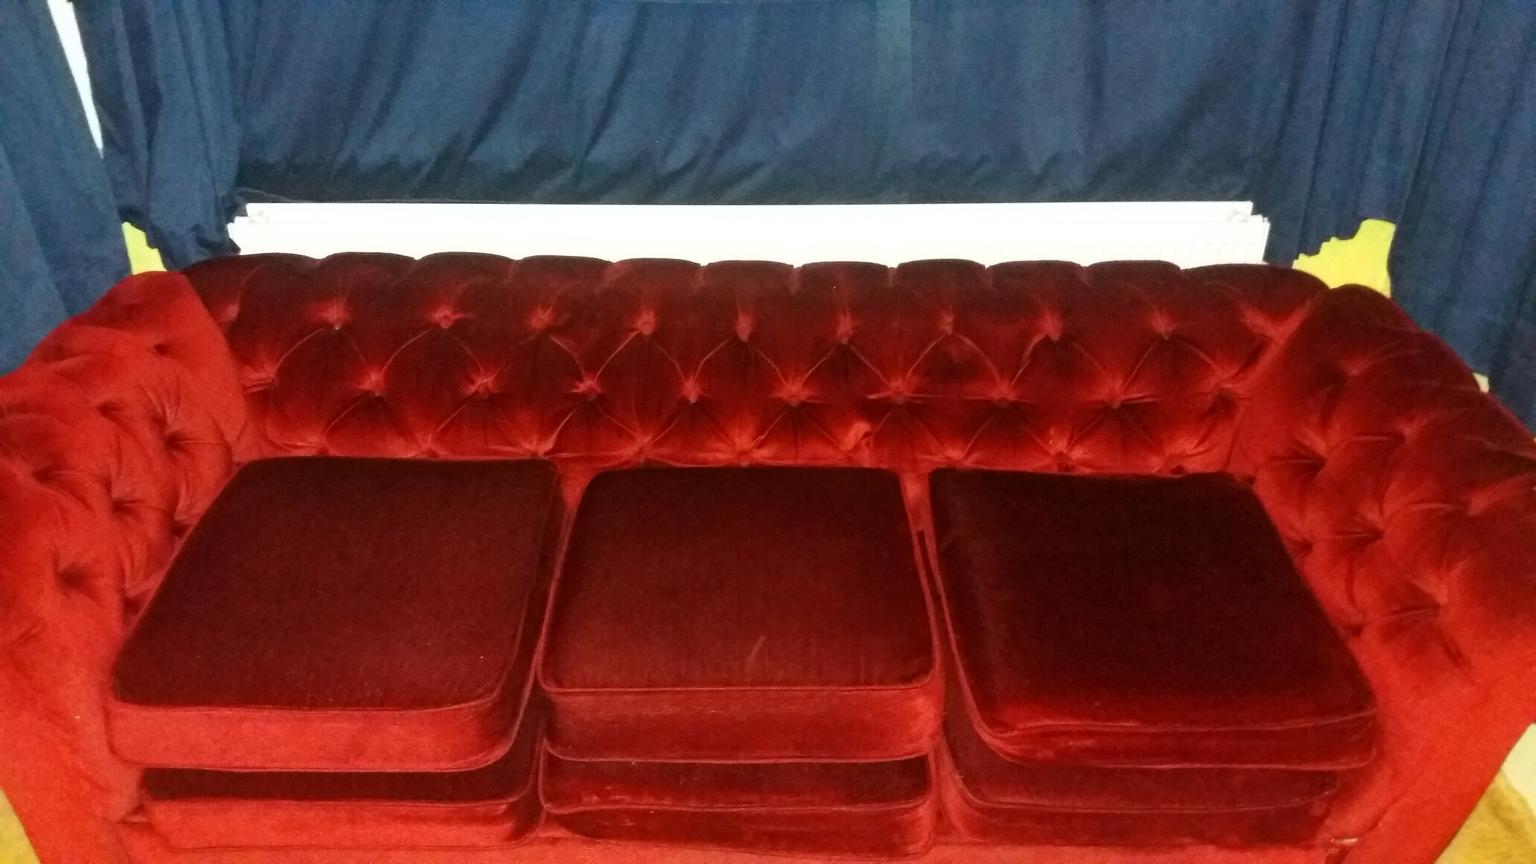 Red Velvet Chesterfield Sofa 3 Seater, Red Chesterfield Sofa Used